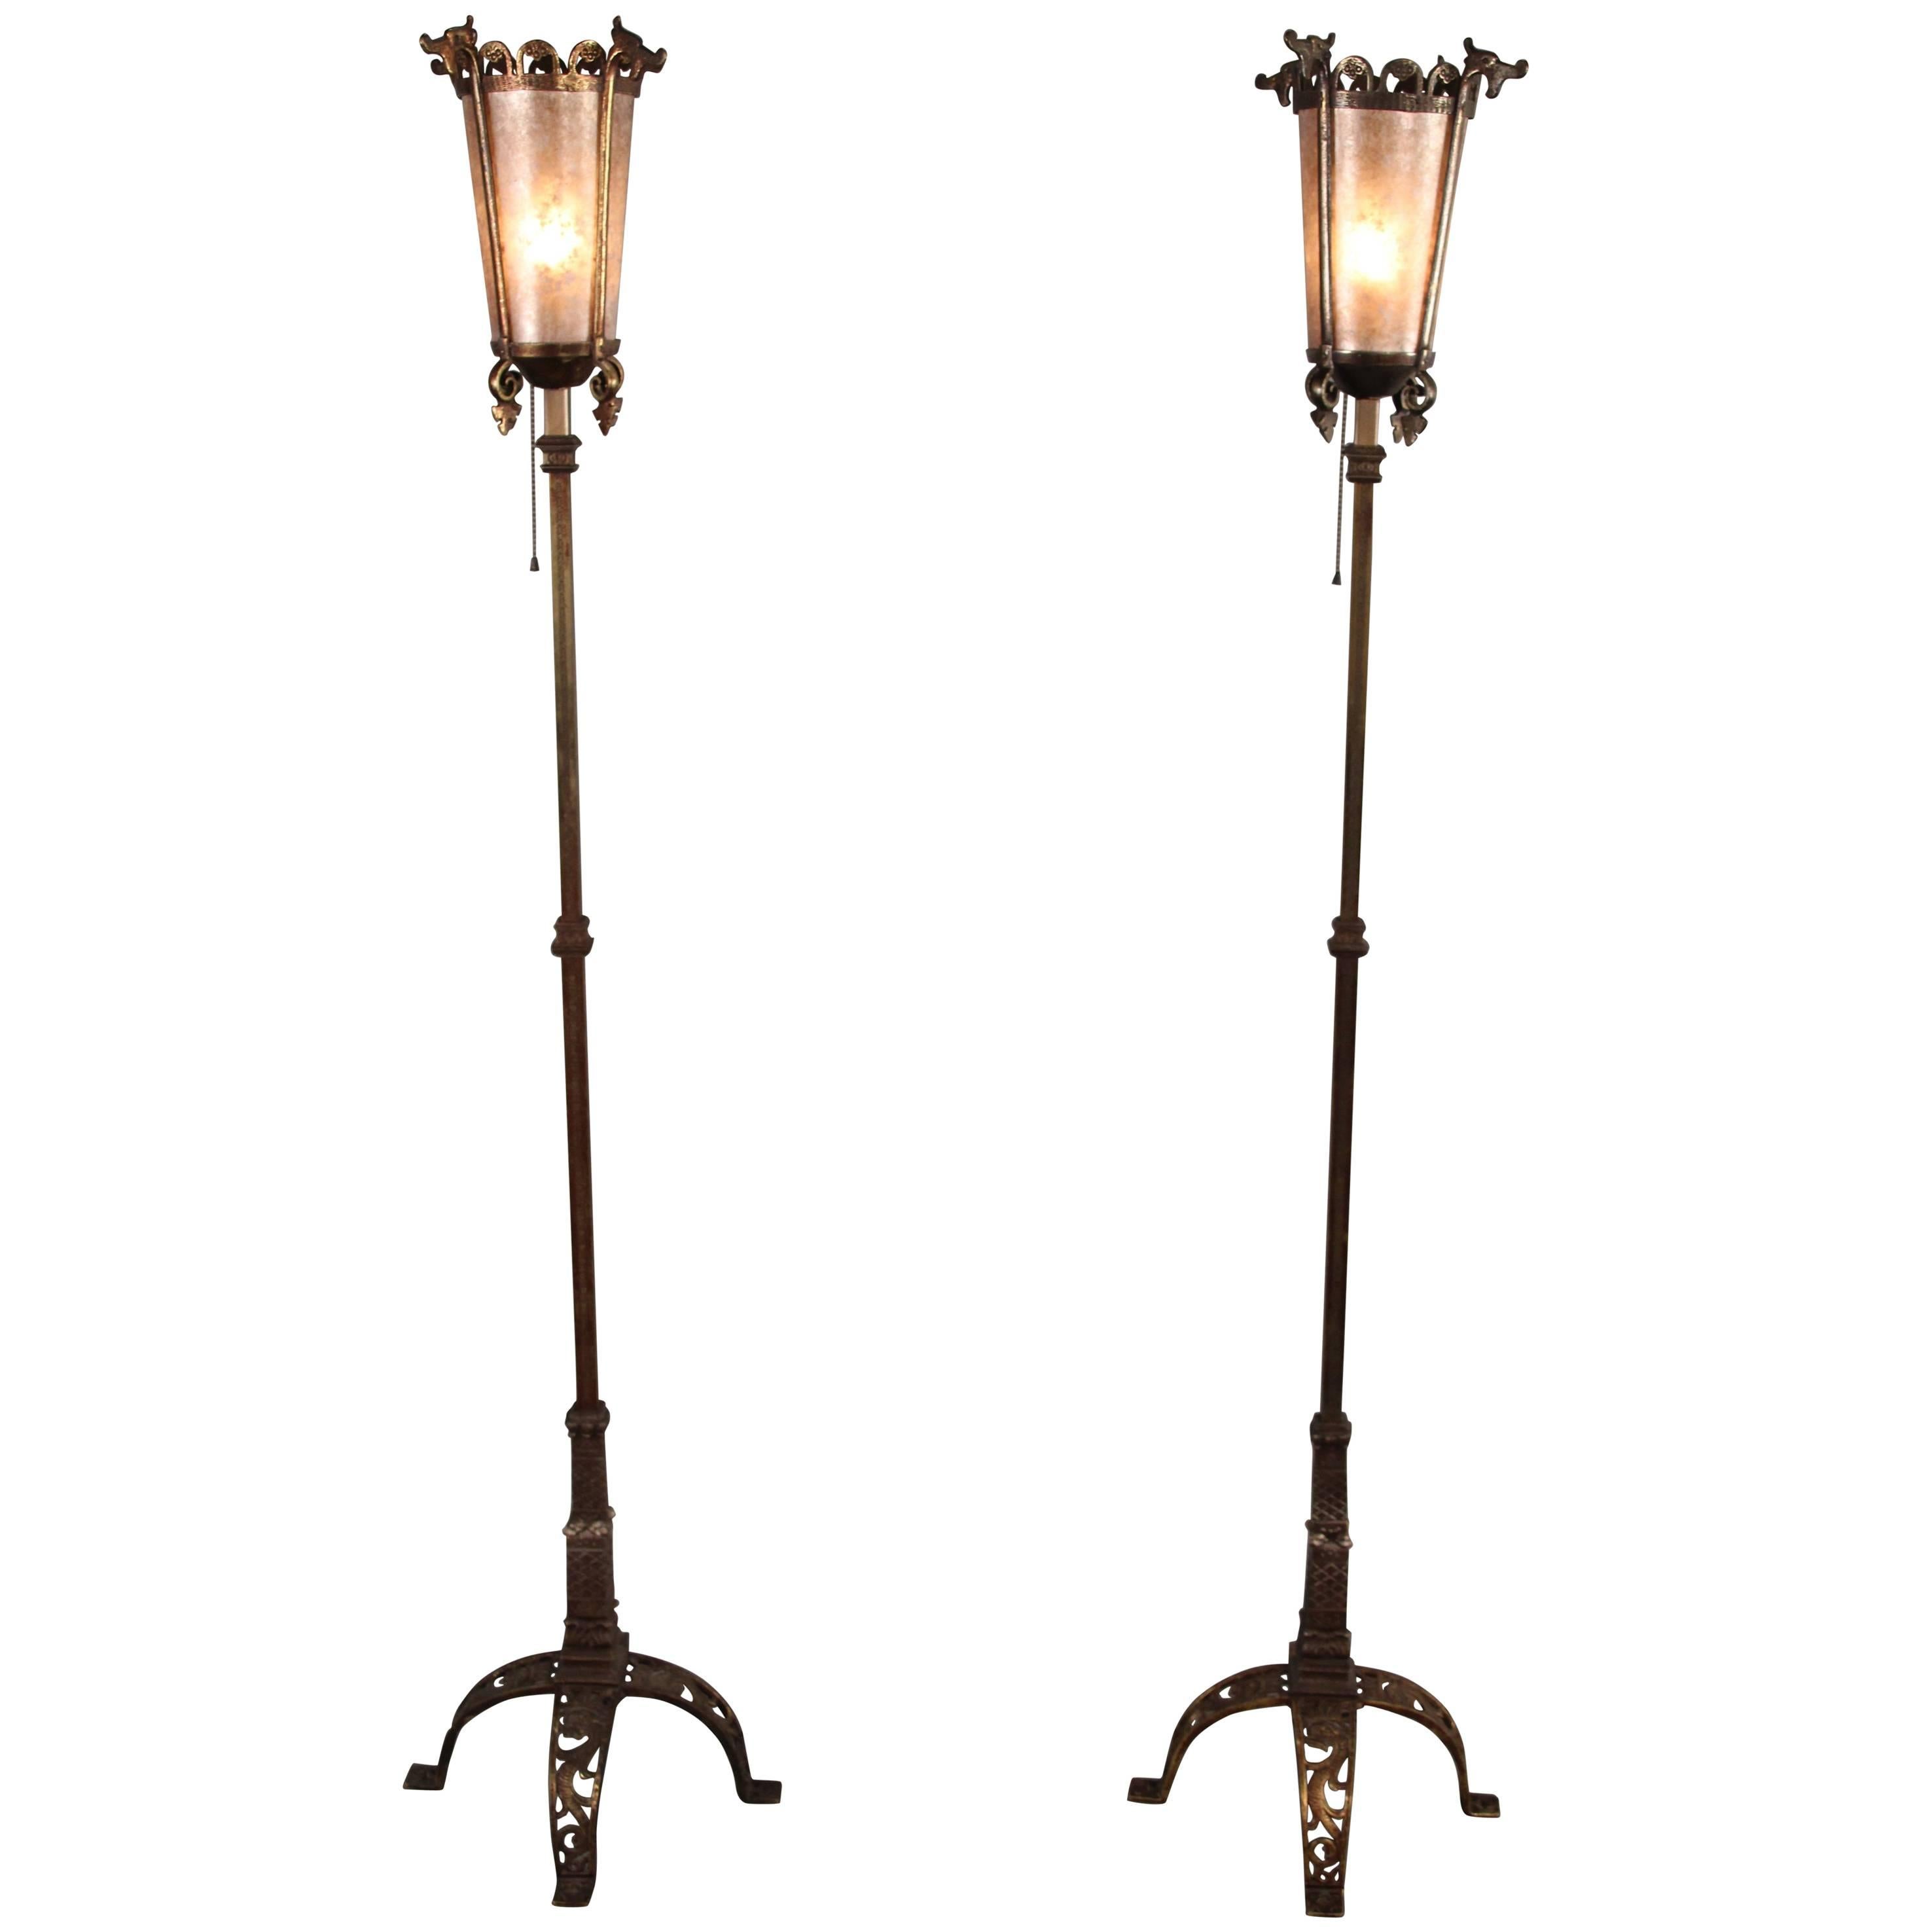 Pair of 1920s Spanish Revival Torchieres with Dragon Motif Attributed Oscar Bach For Sale